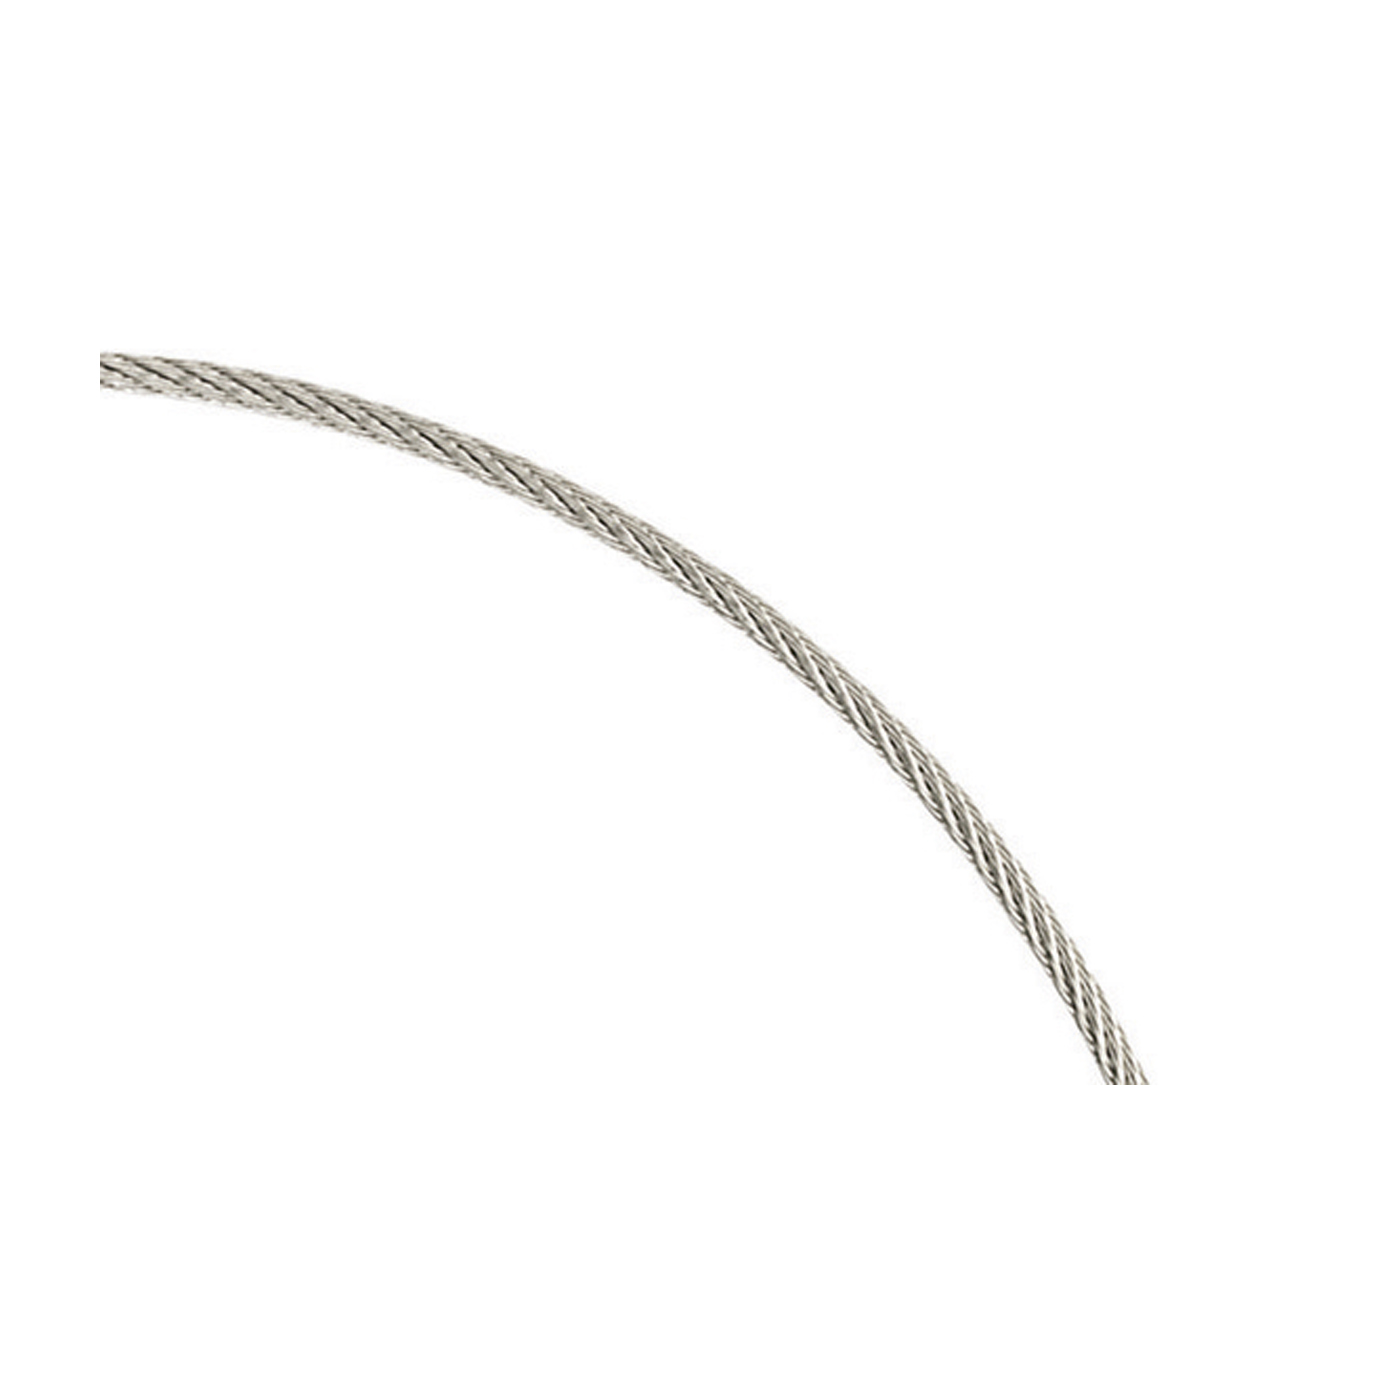 Steel Cable Neck Wire, ø 1.00 mm, 45 cm - 1 piece